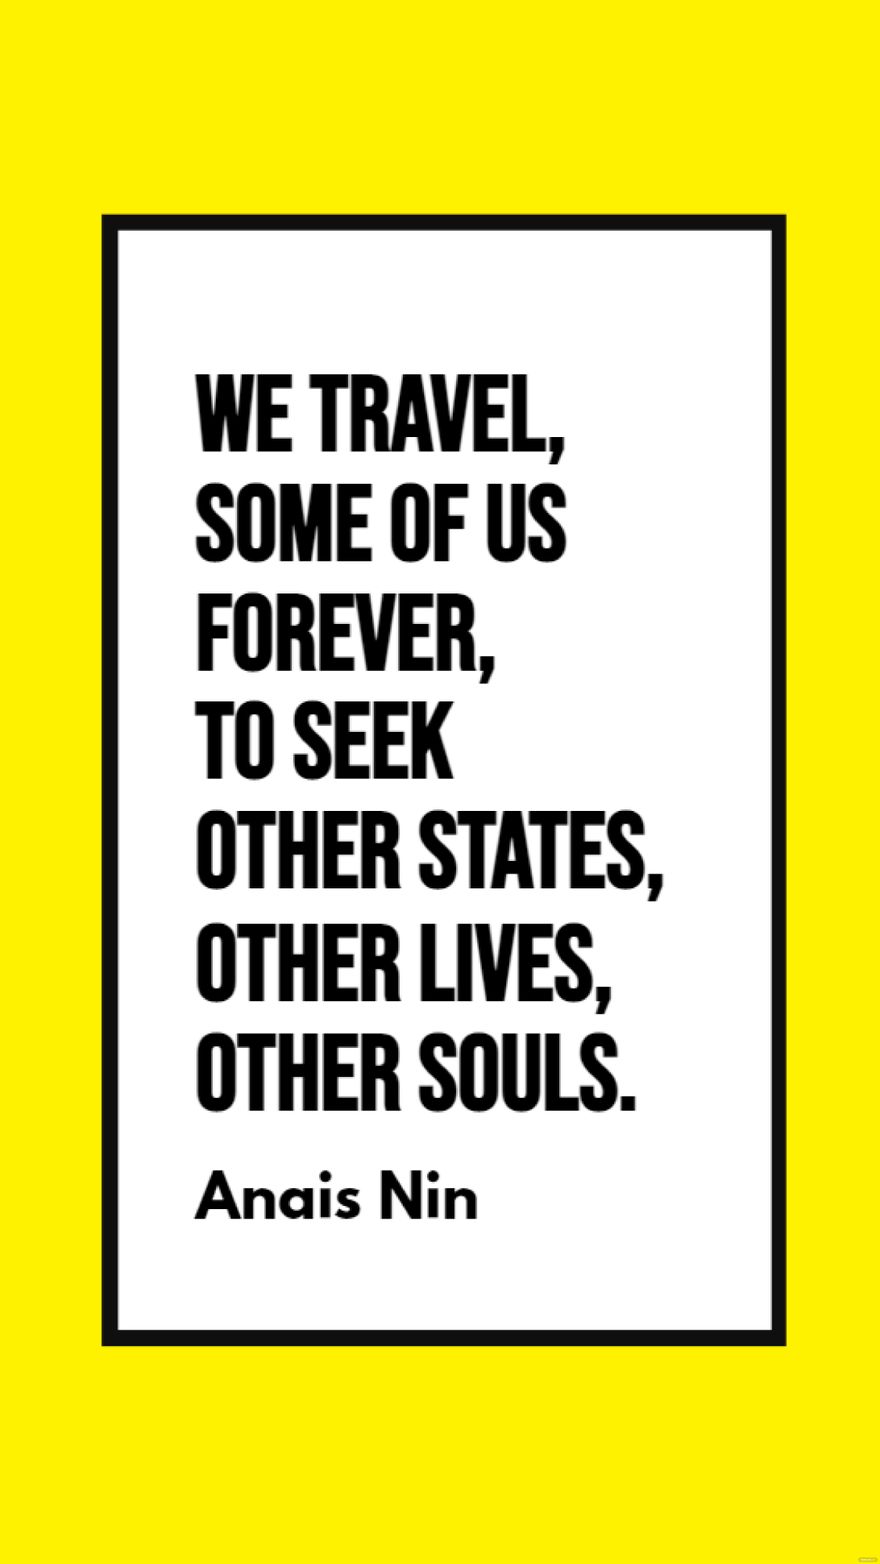 Anais Nin - We travel, some of us forever, to seek other states, other lives, other souls.